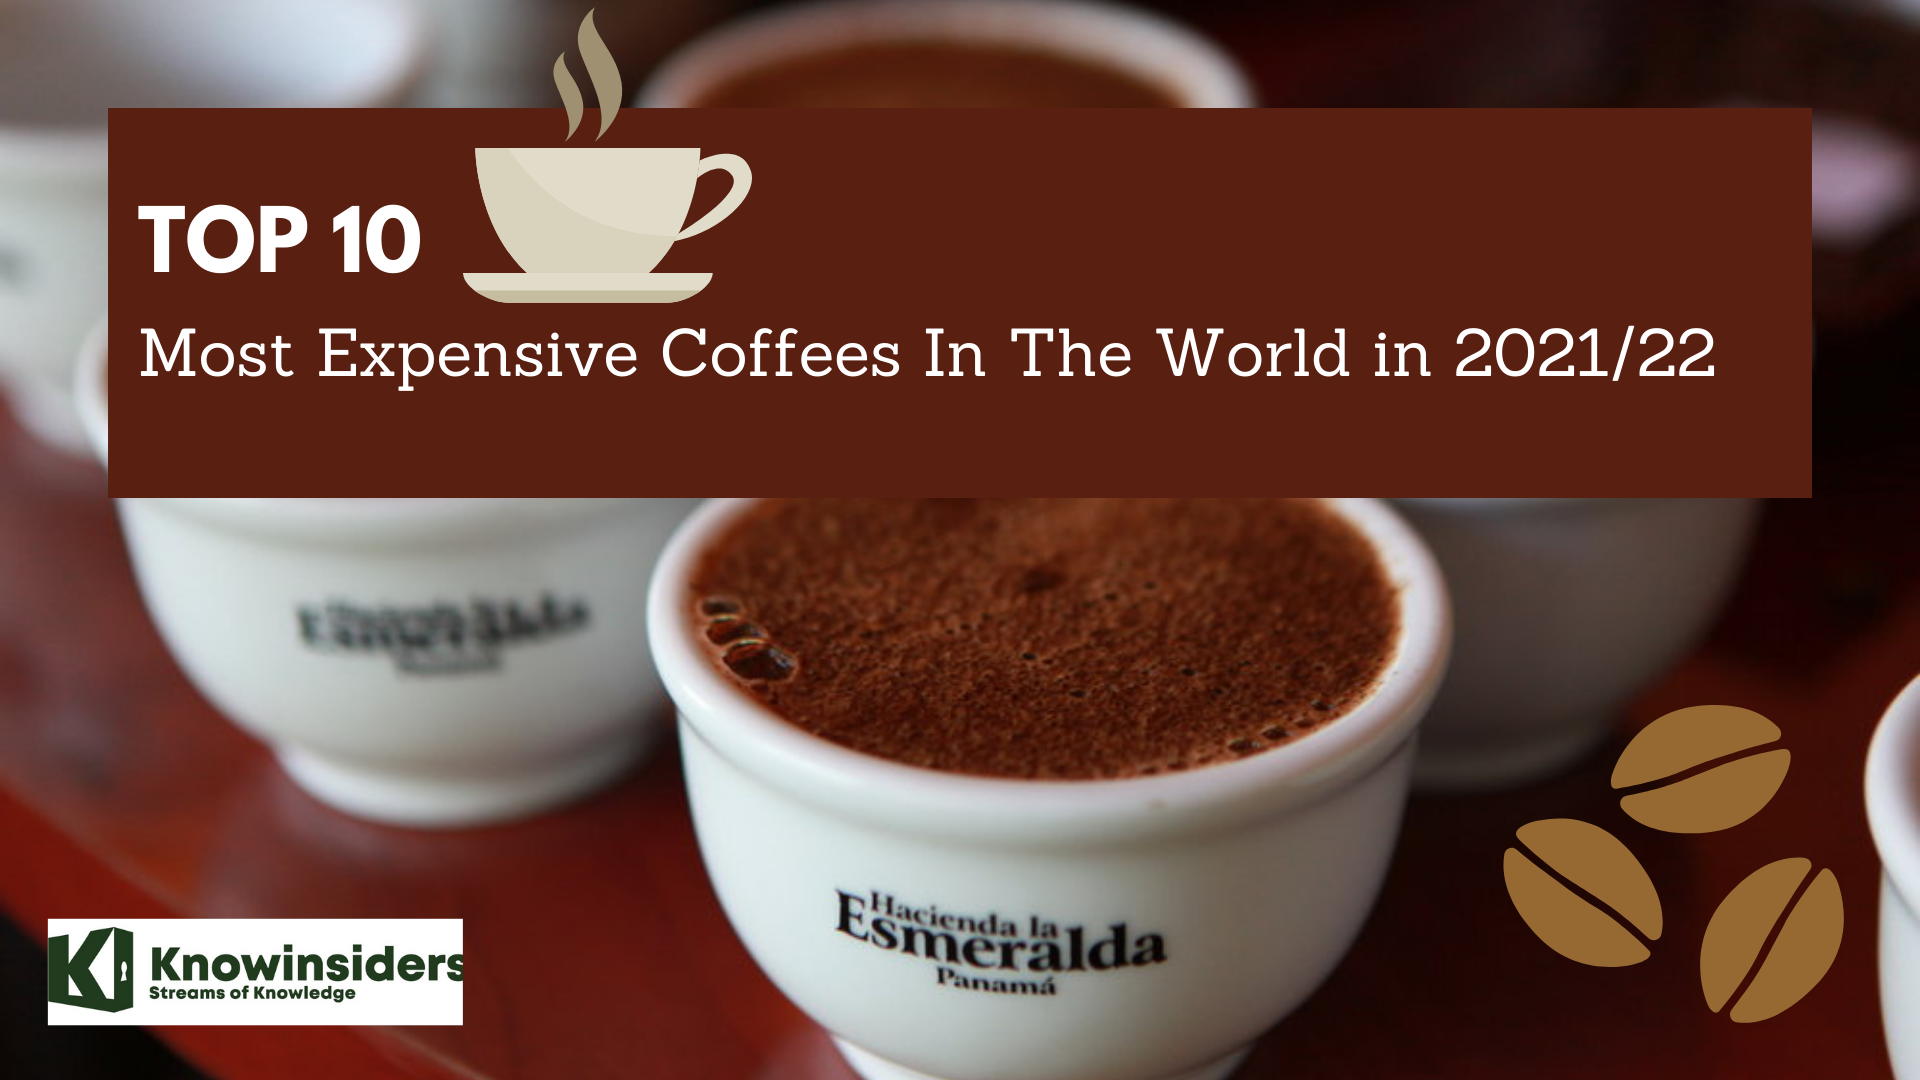 Top 10 Most Expensive Coffee In The World for 2021/2022